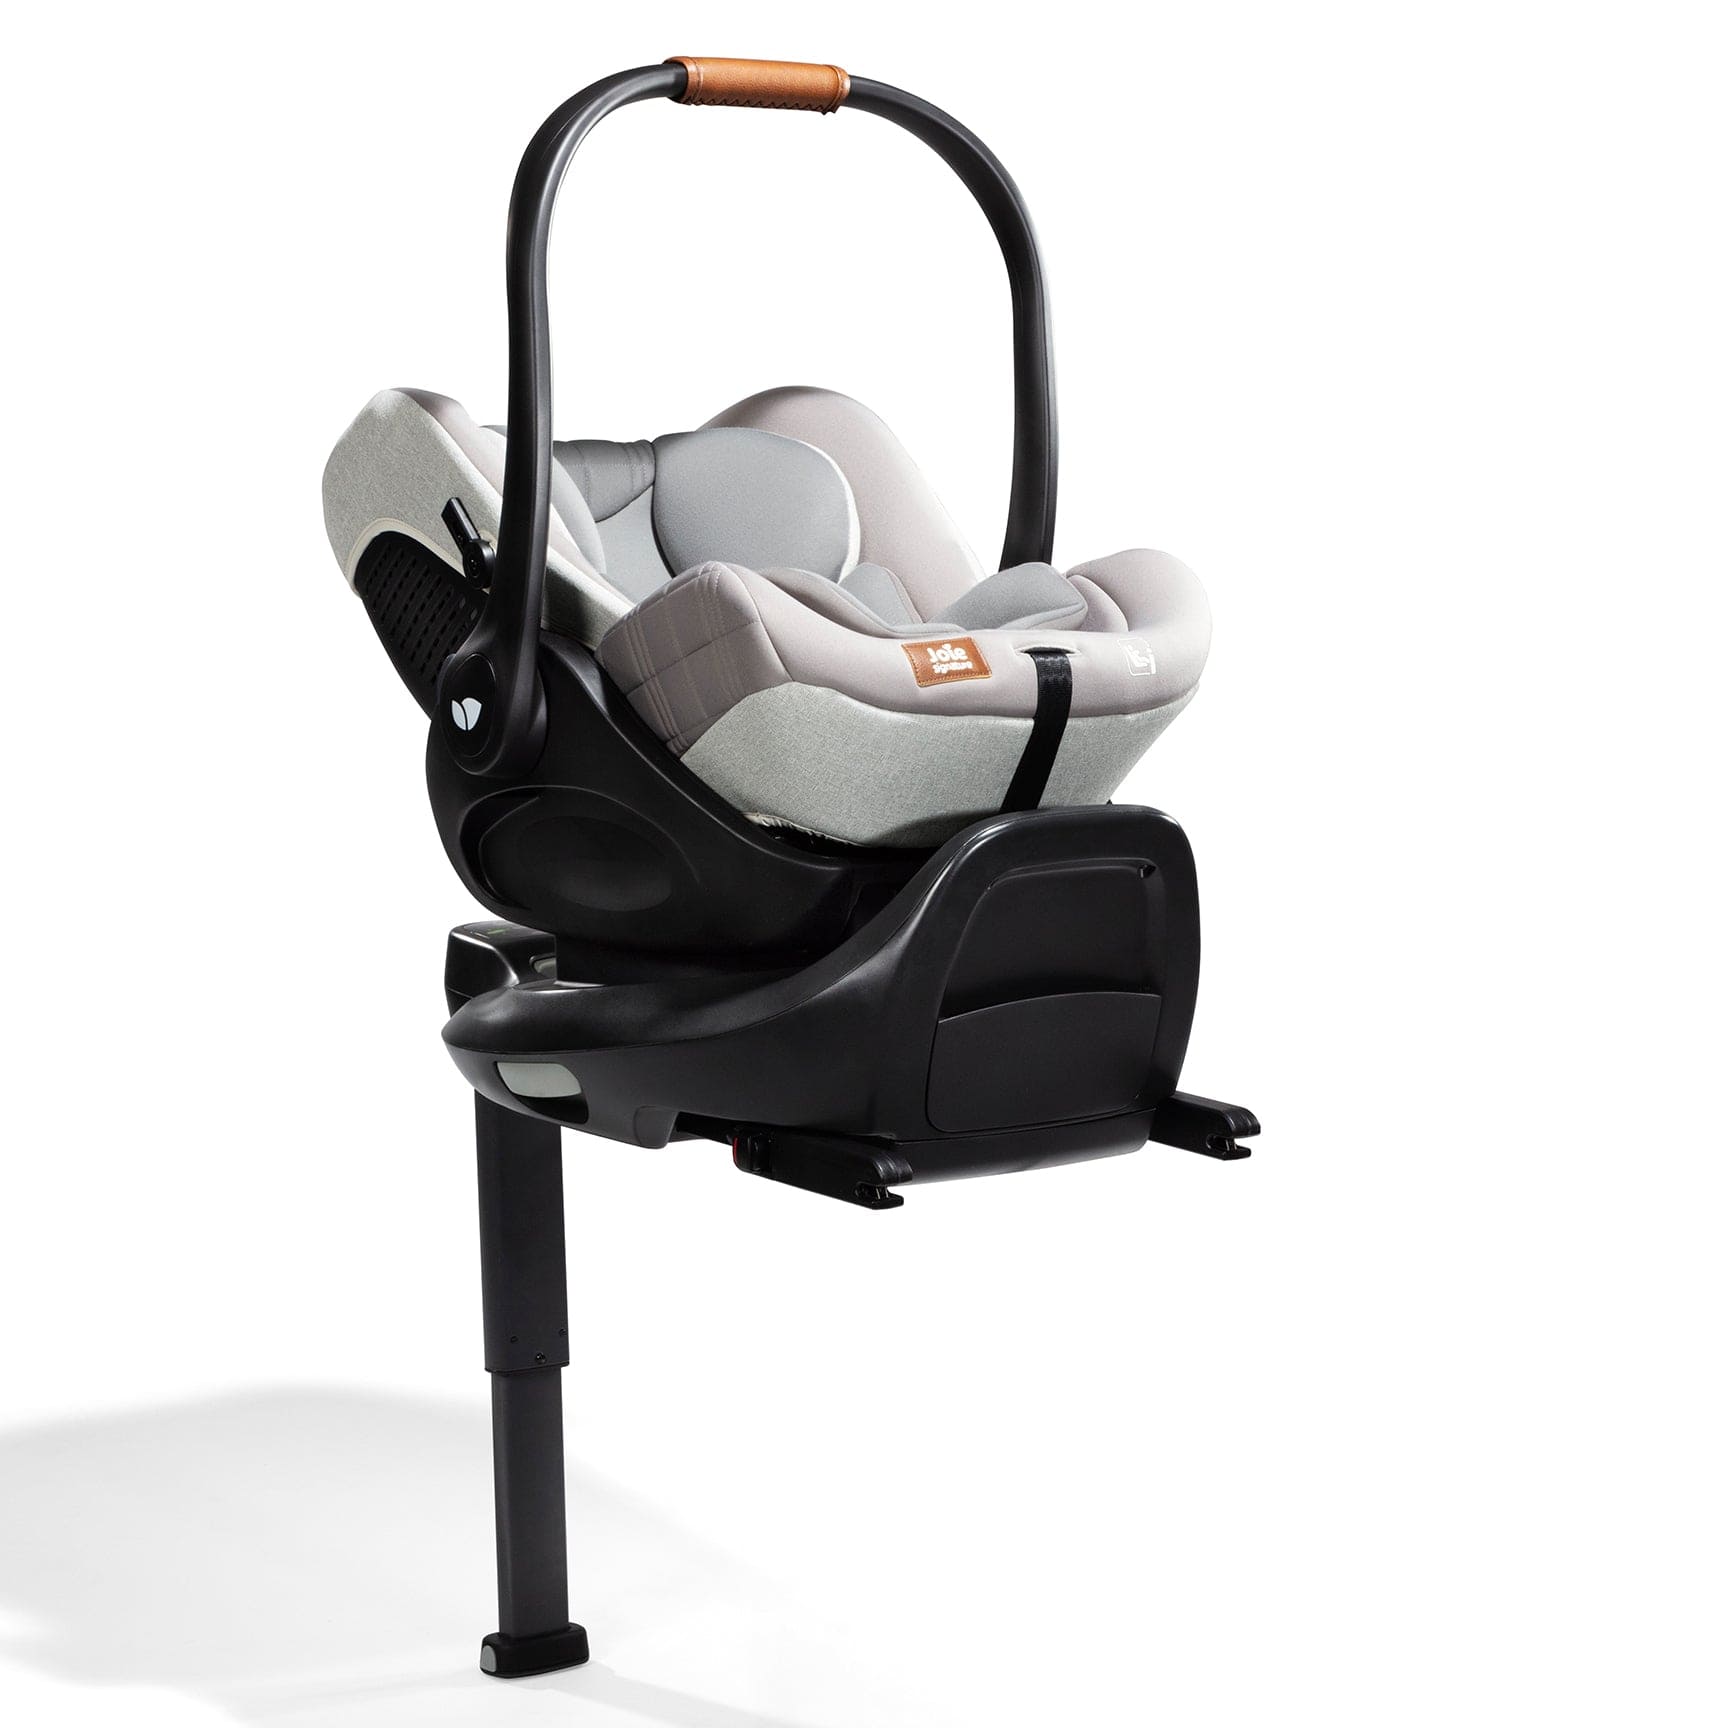 Joie i-Level Recline Signature Car Seat in Oyster Baby Car Seats C1510GAOYS000 5056080612874